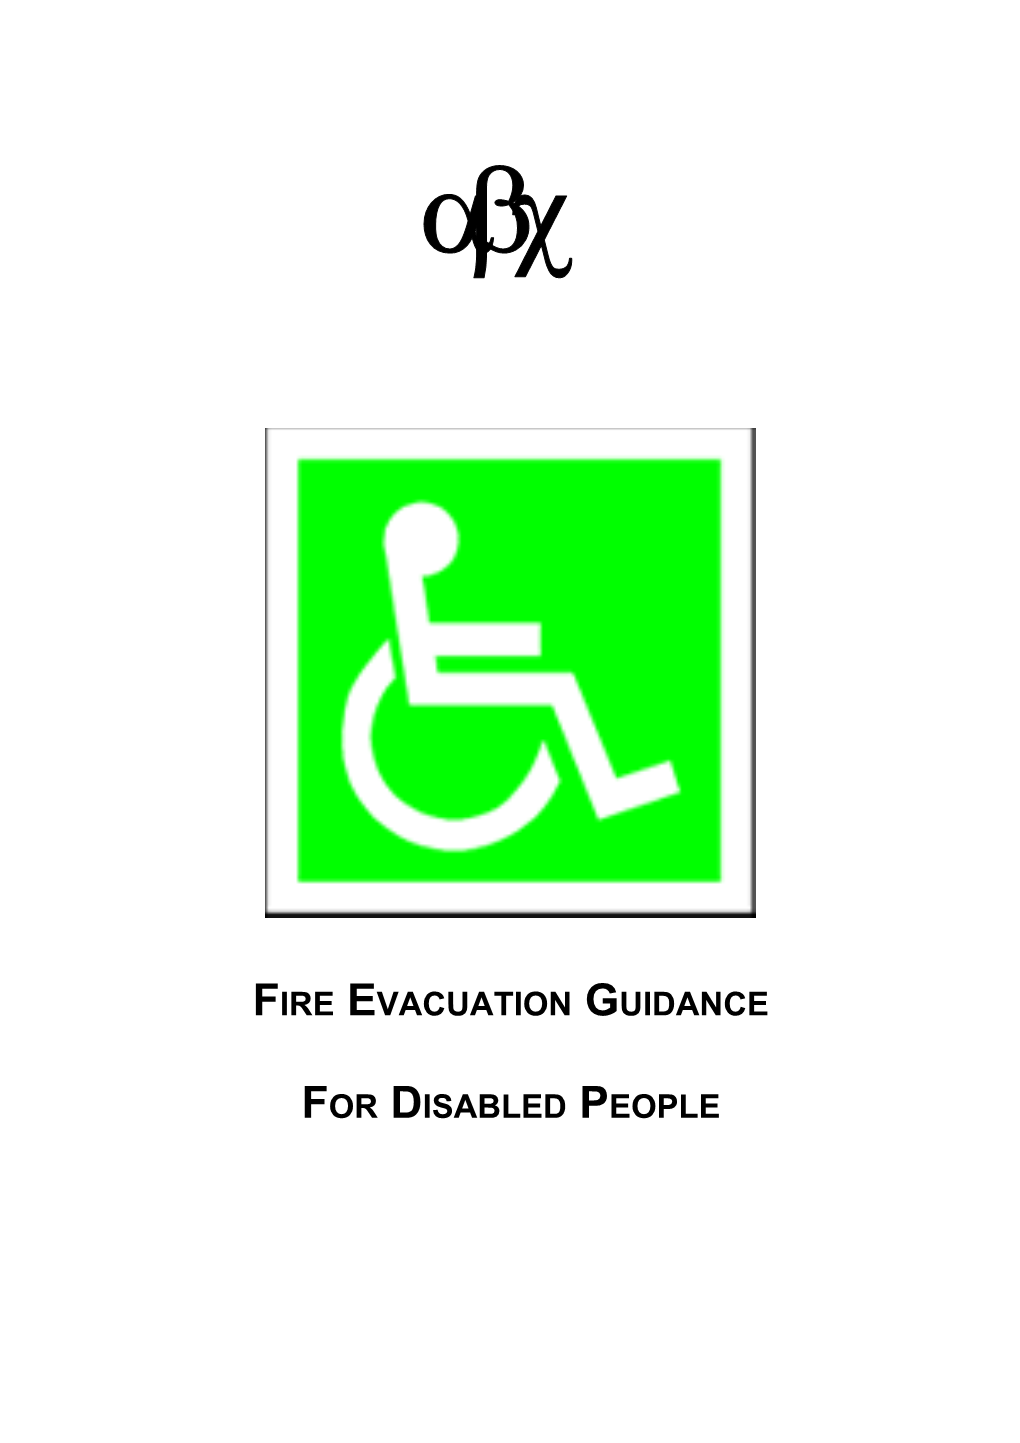 Fire Evacuation Procedures for Disabled People